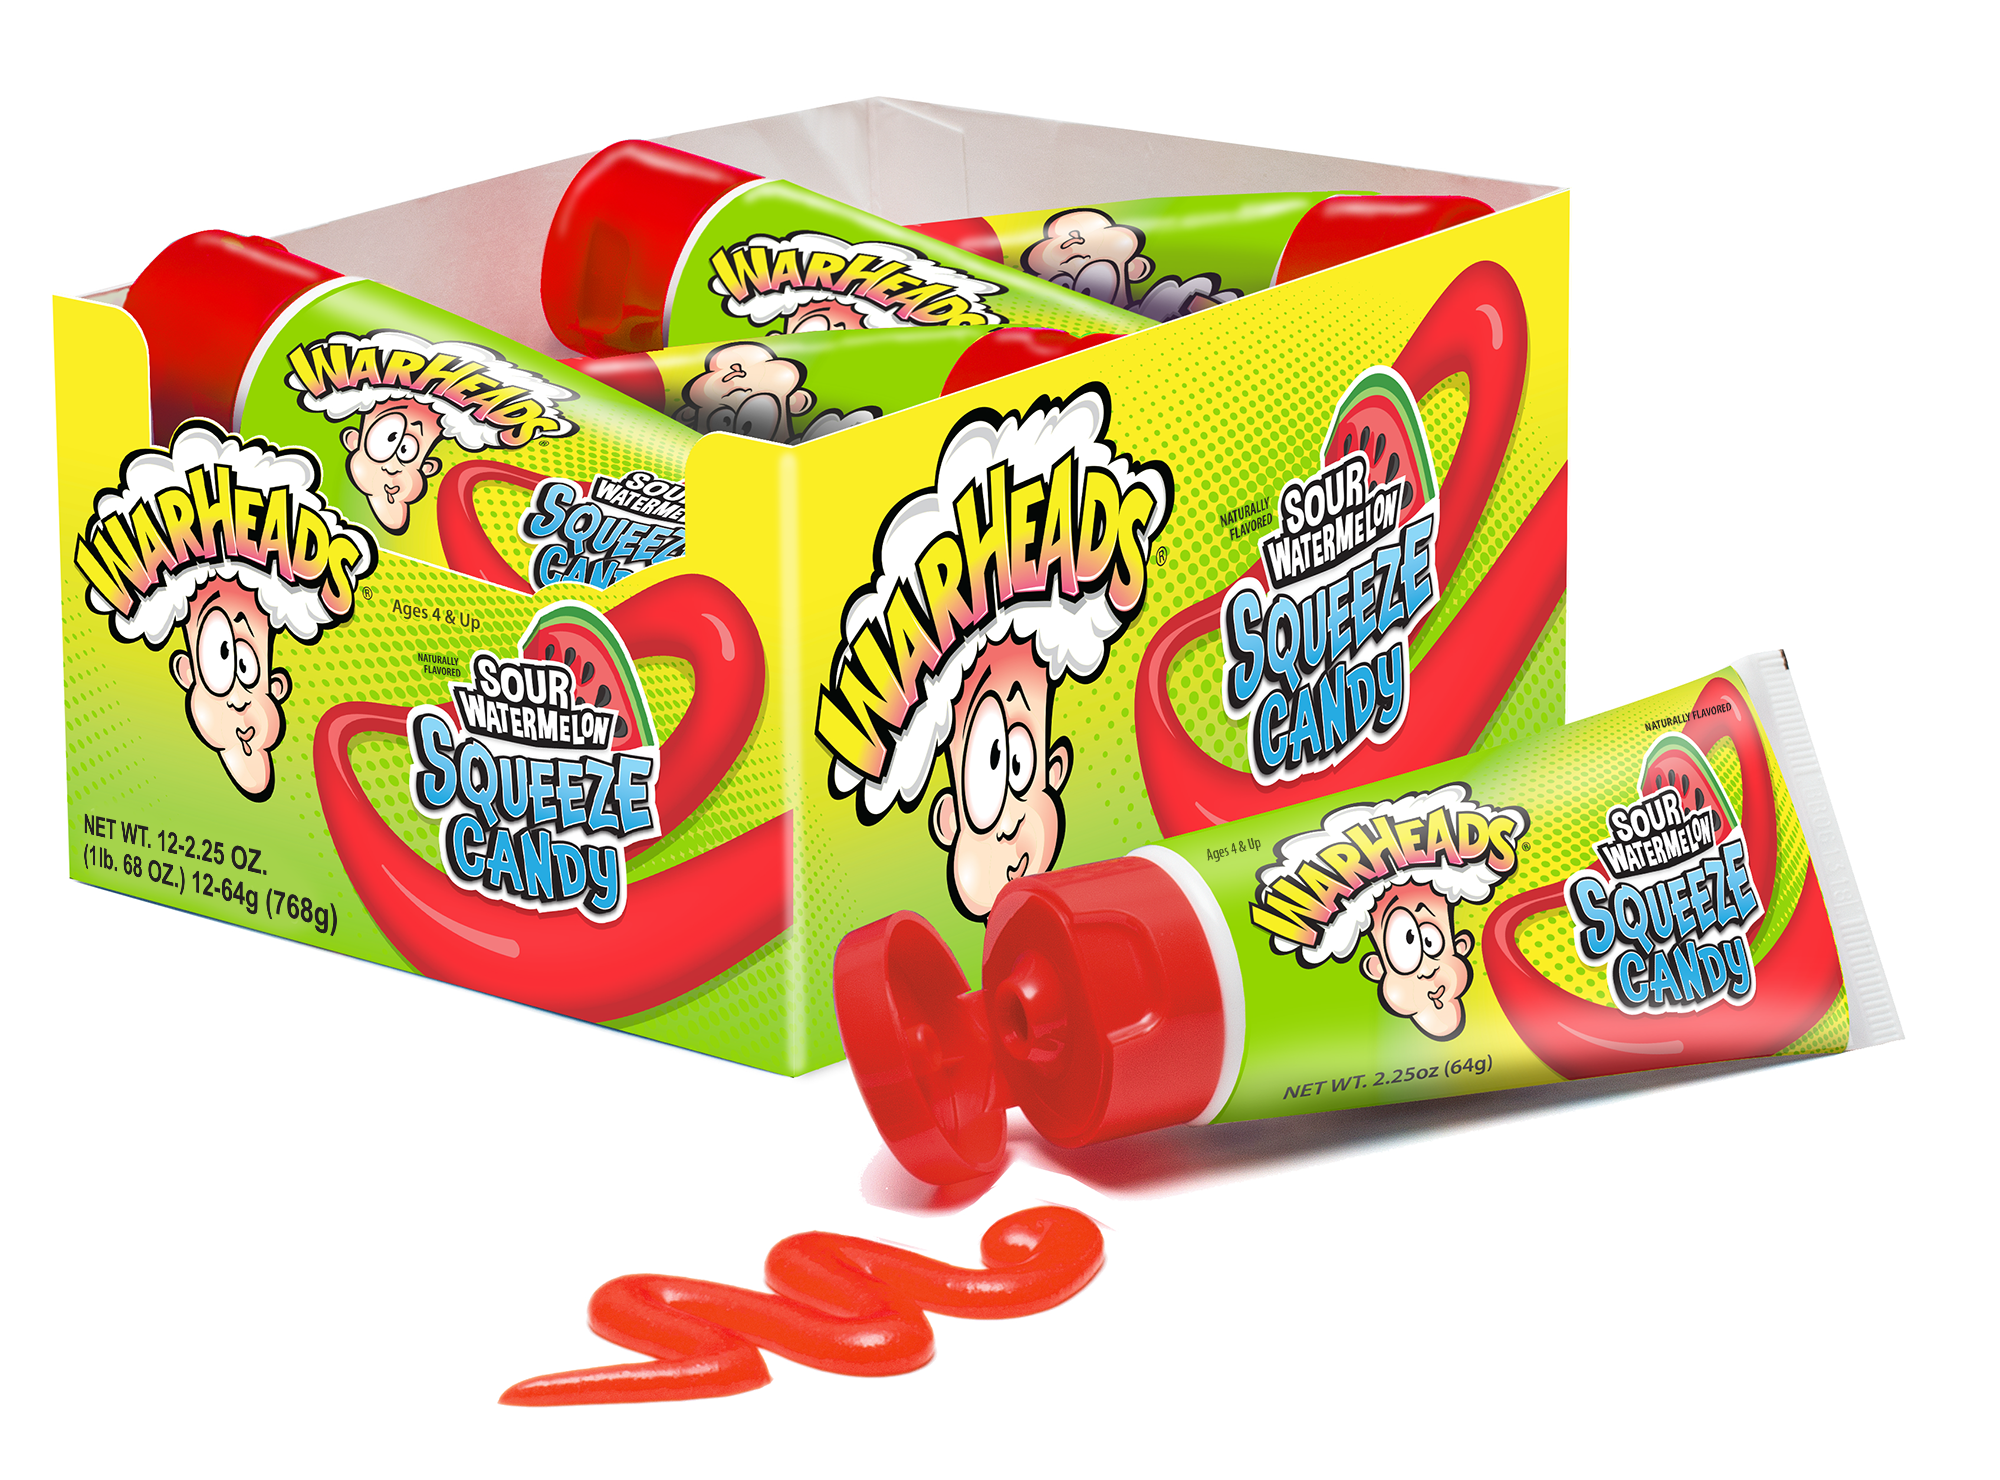 WARHEADS SQUEEZE CANDY SOUR WATERMELON